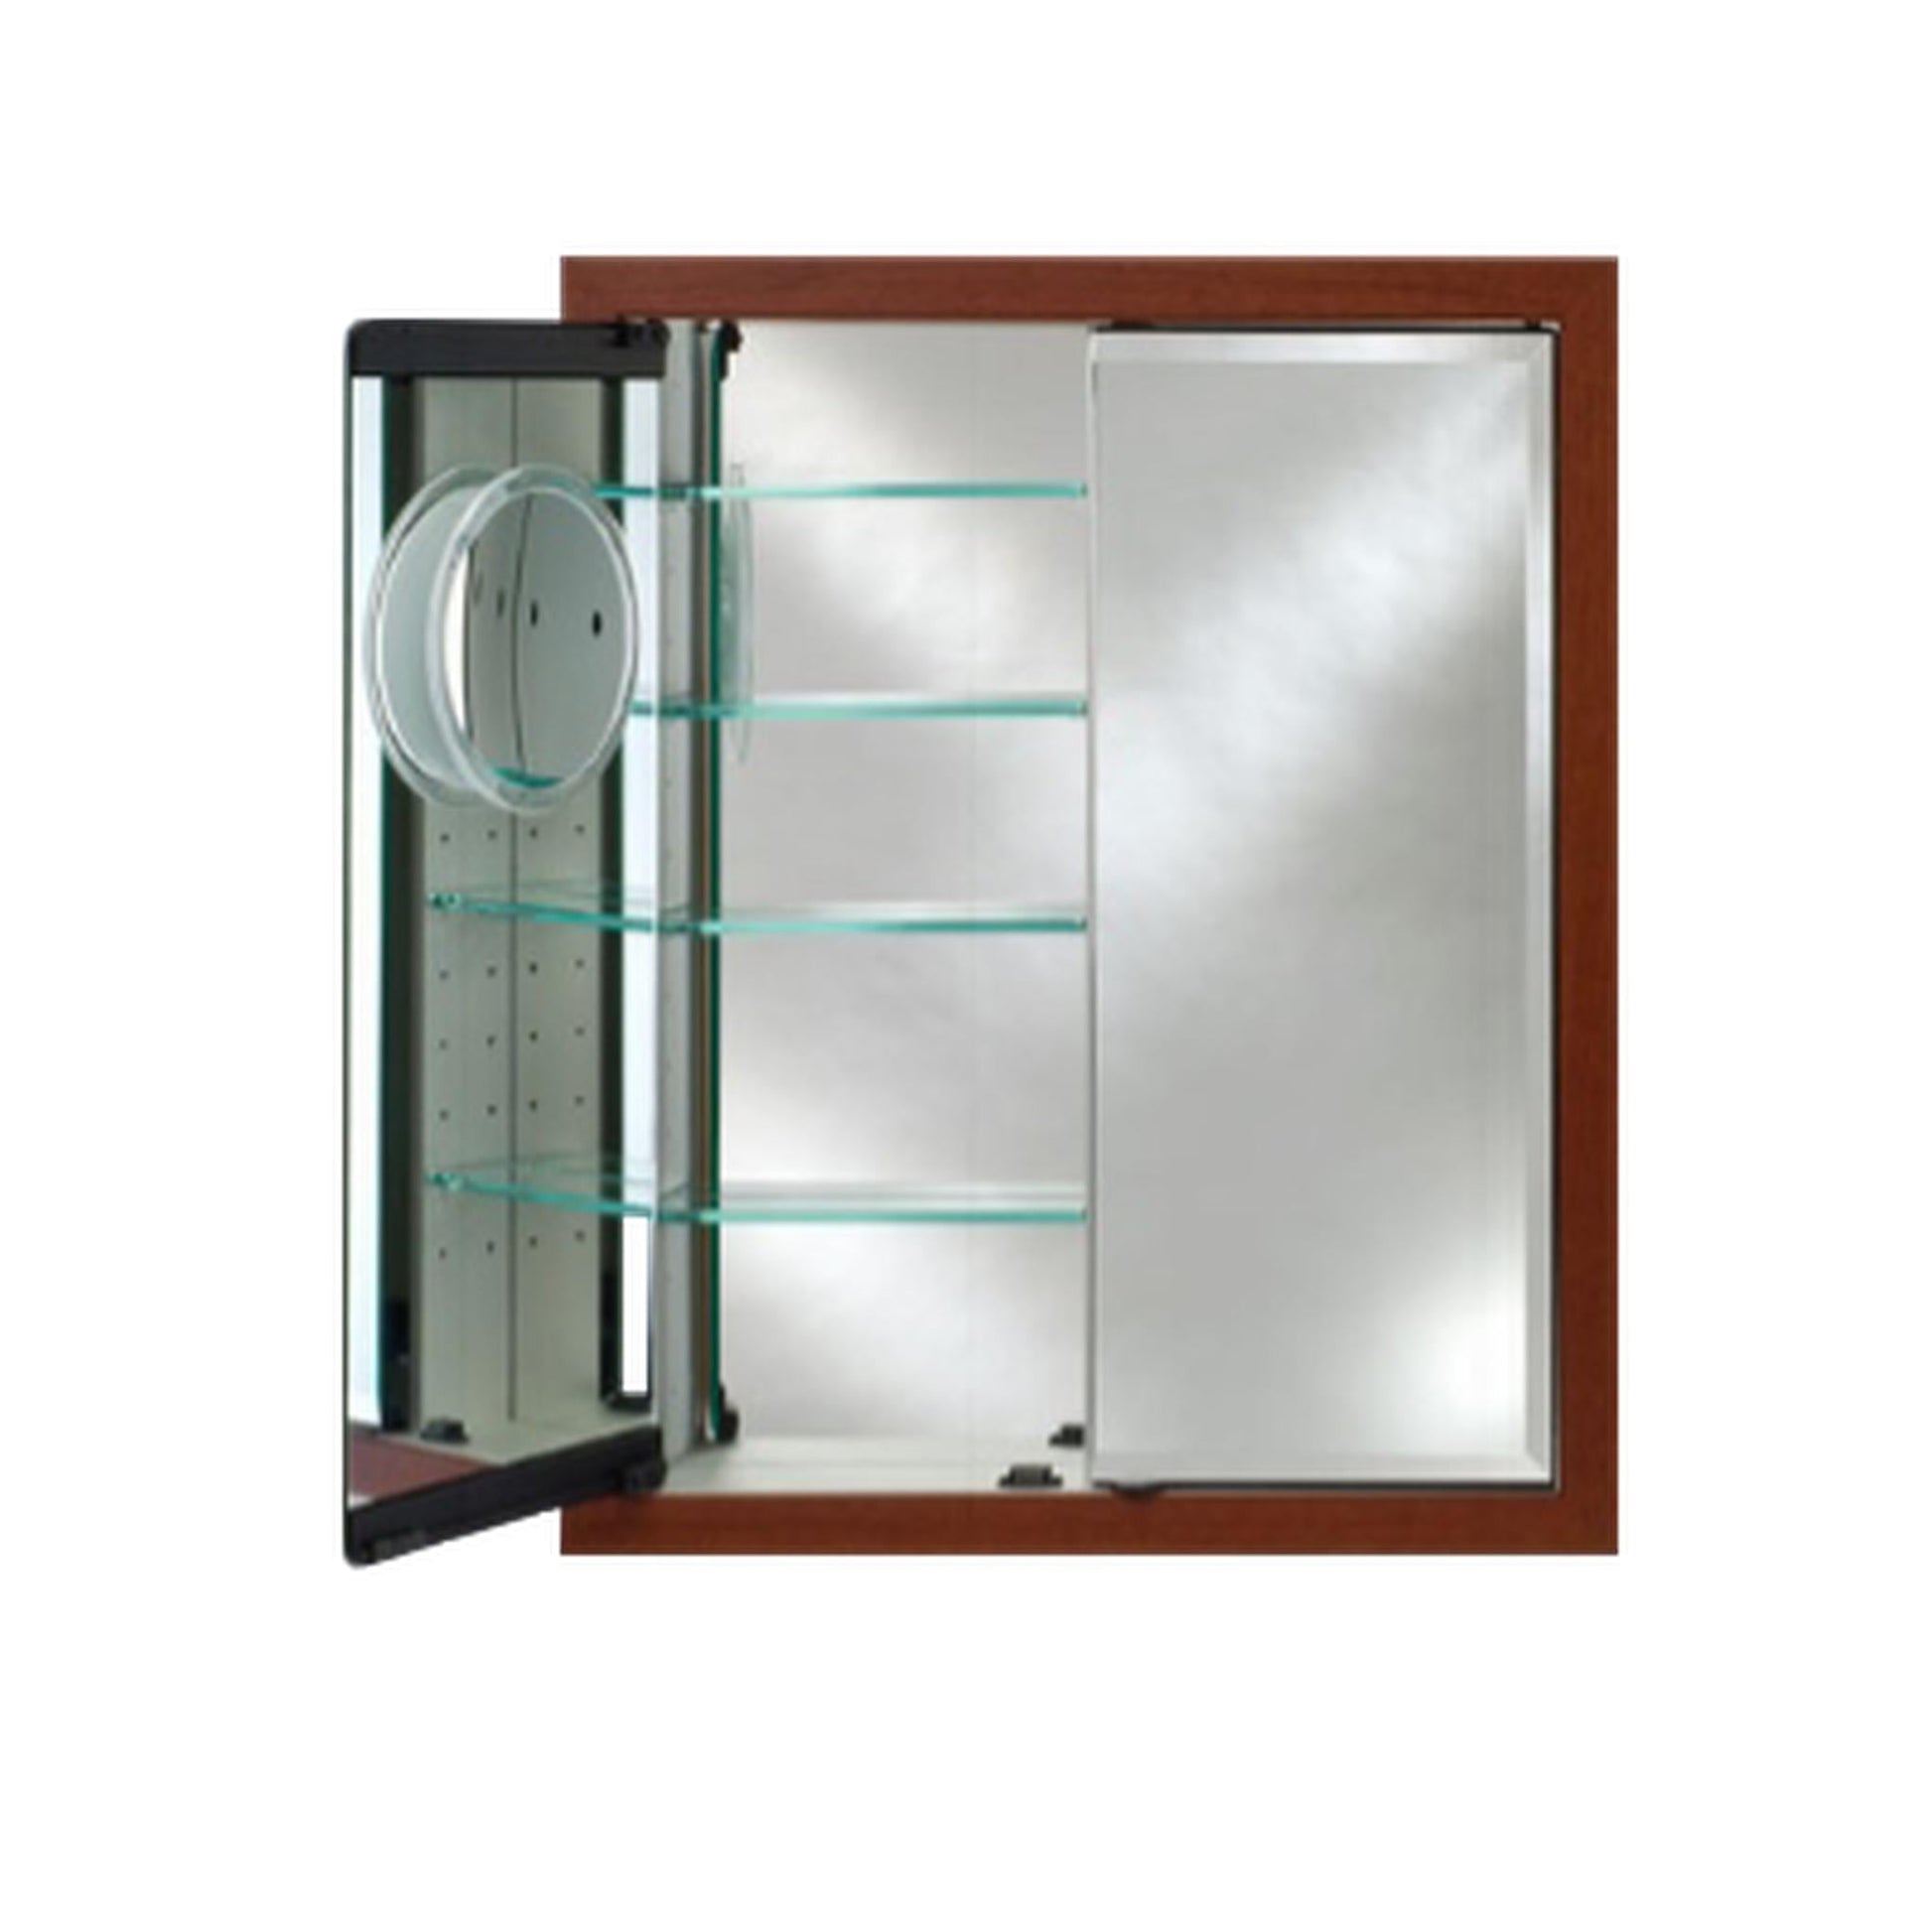 Afina Signature 24" x 30" Polished Glimmer-Flat Recessed Double Door Medicine Cabinet With Beveled Edge Mirror